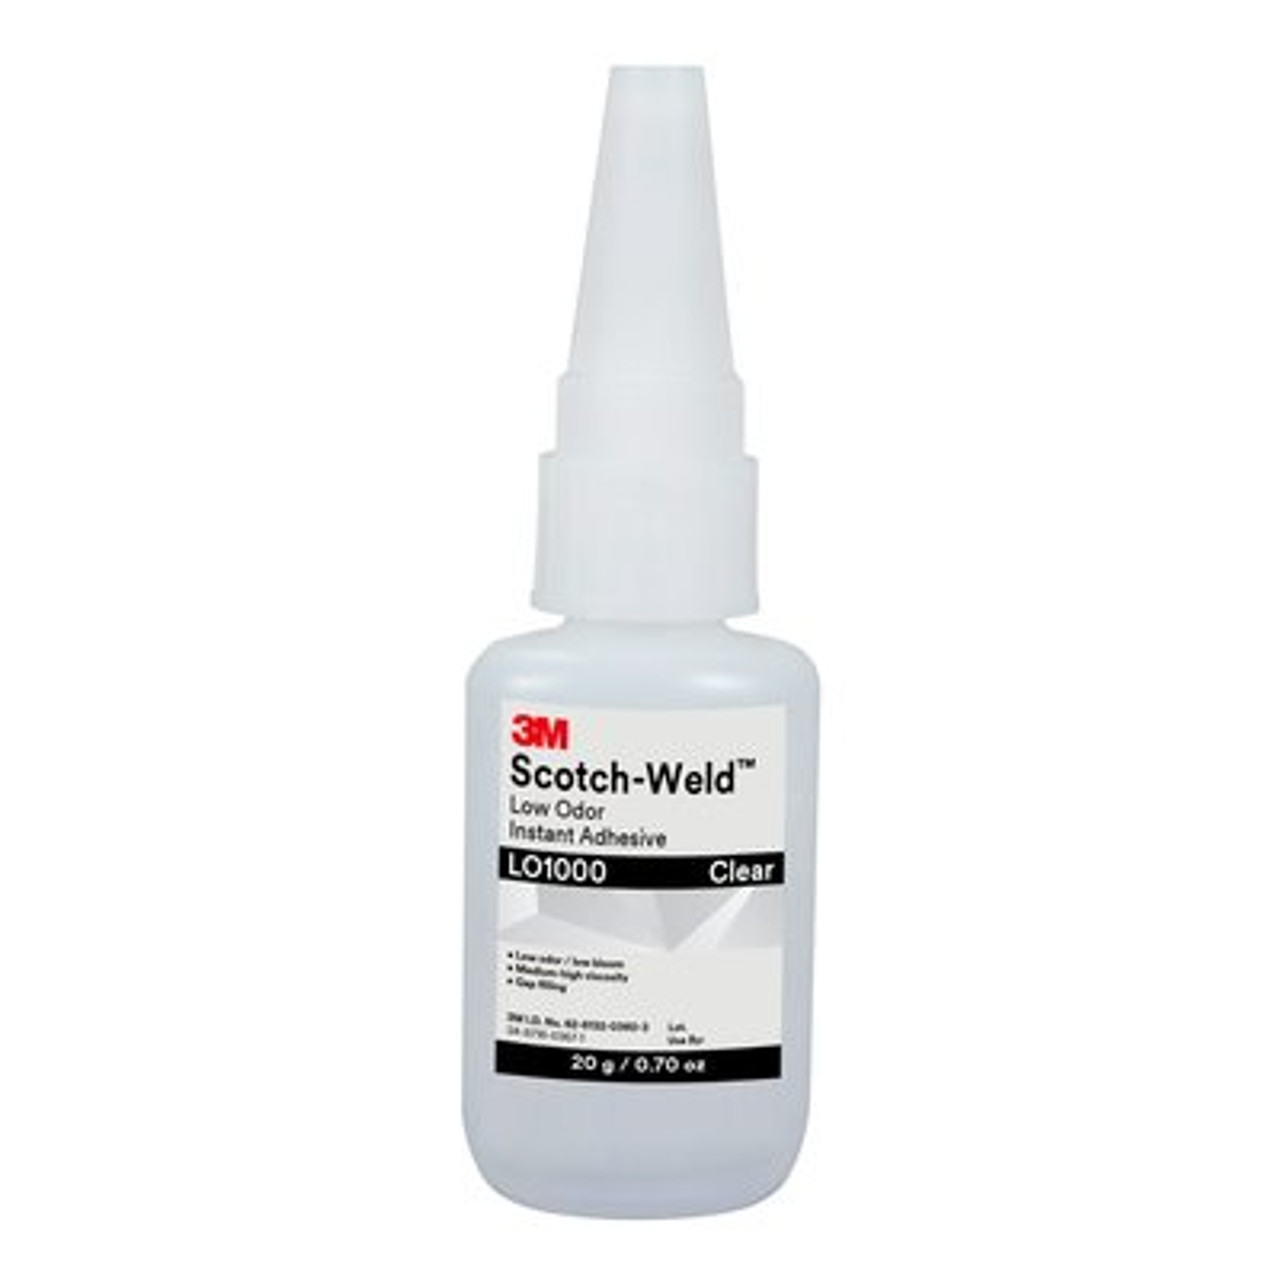 3M™ Scotch-Weld™ Low Odor Instant Adhesive LO1000, Clear, 20 Gram Bottle